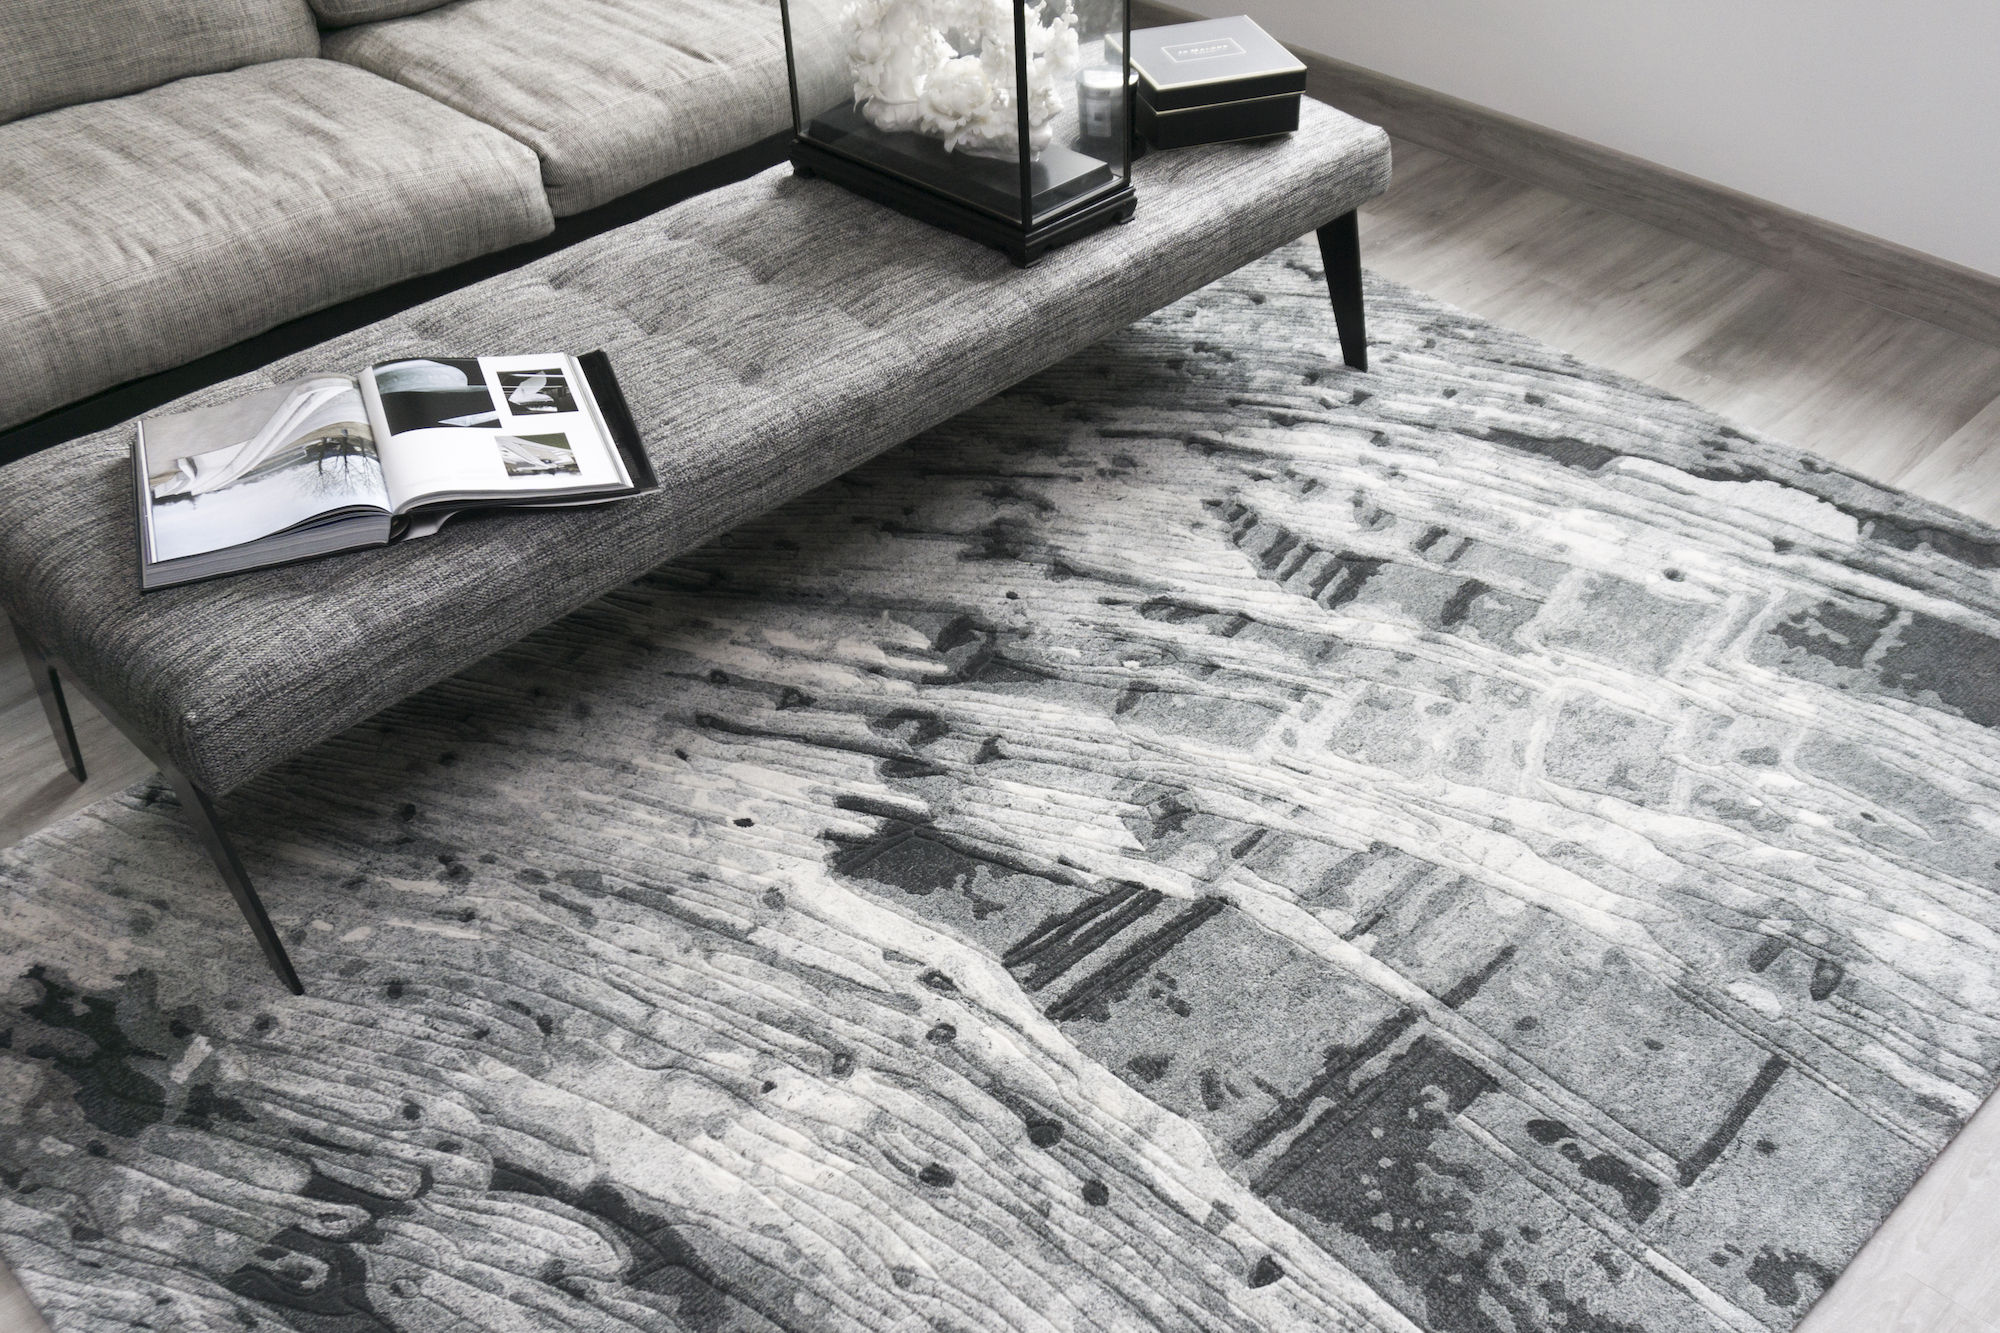 How Omar Khan’s Love For Family And Design Inspired His Grey Matters Collection For Artèfloor